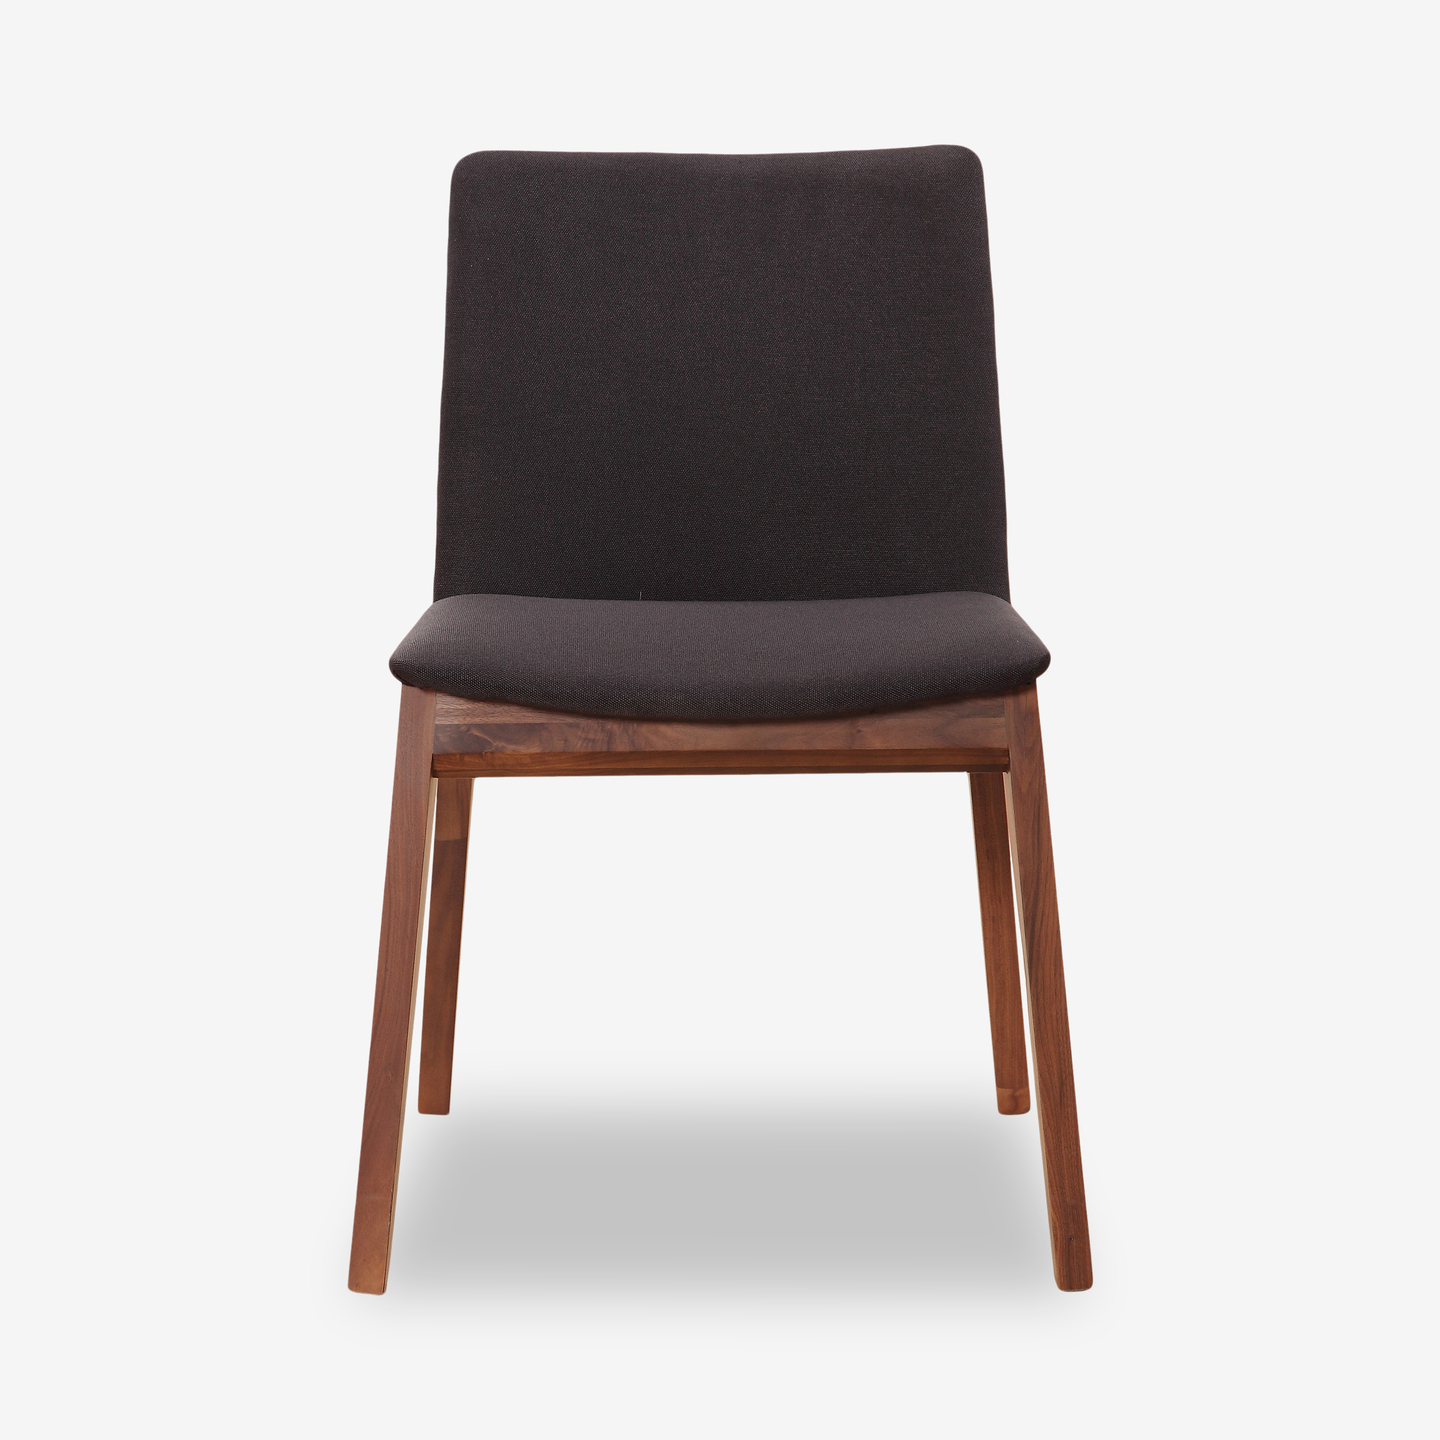 1364_Hudson-Dining-Chair_Front_2021